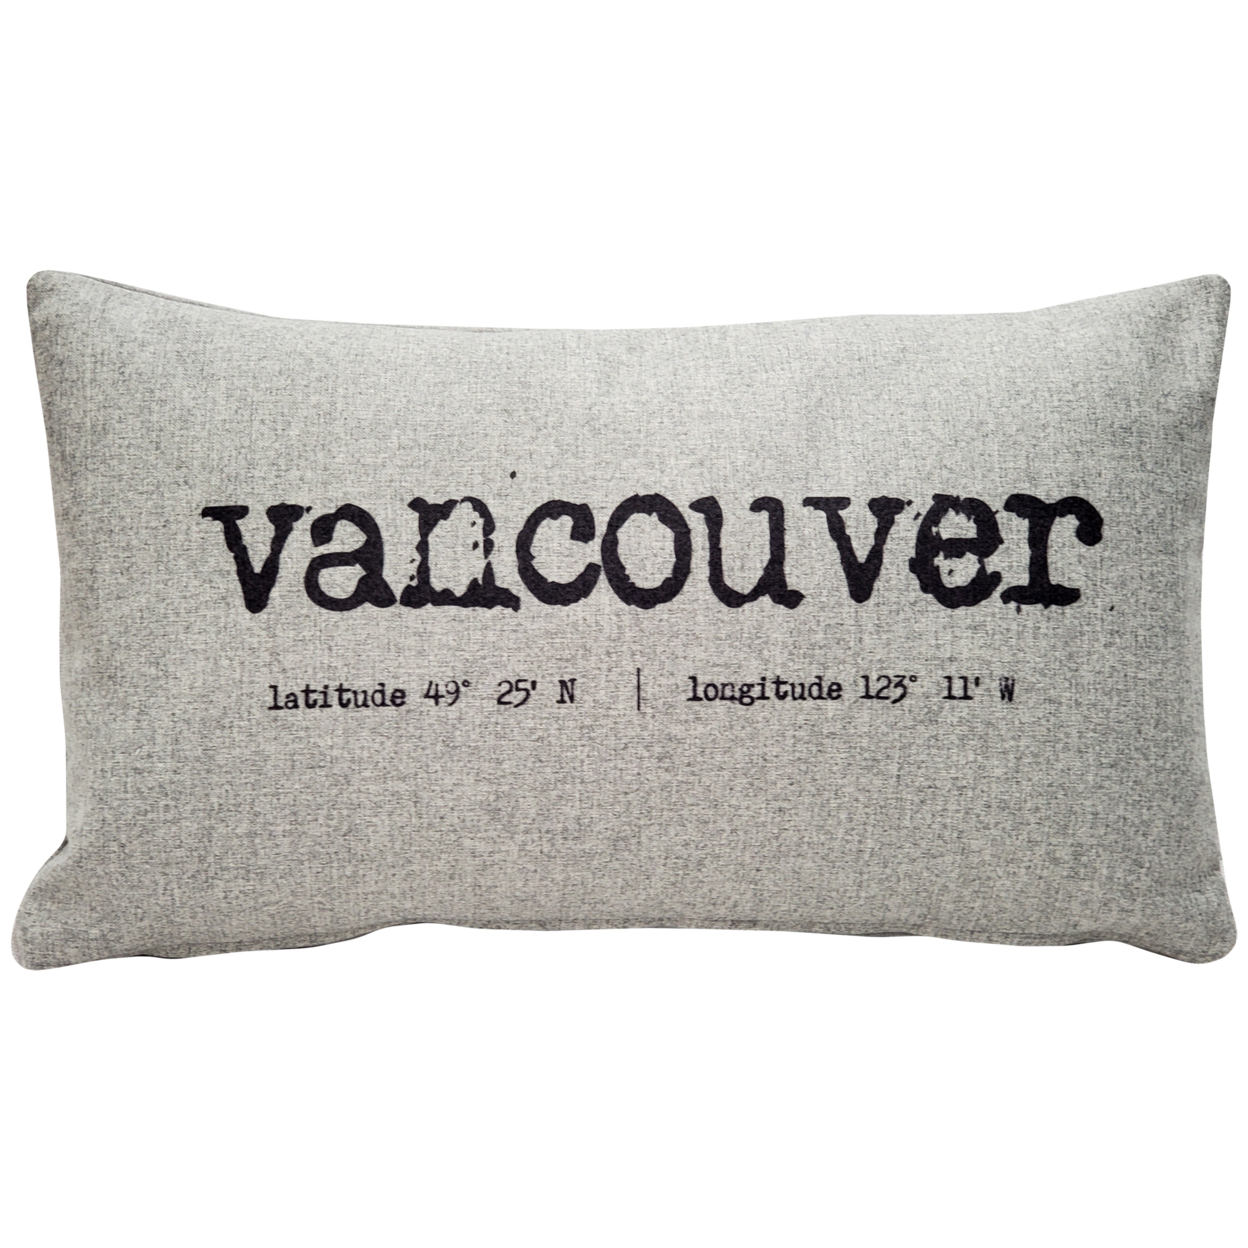 Vancouver Gray Felt Coordinates Pillow 12x19 Inches Square, Complete Pillow With Polyfill Pillow Insert